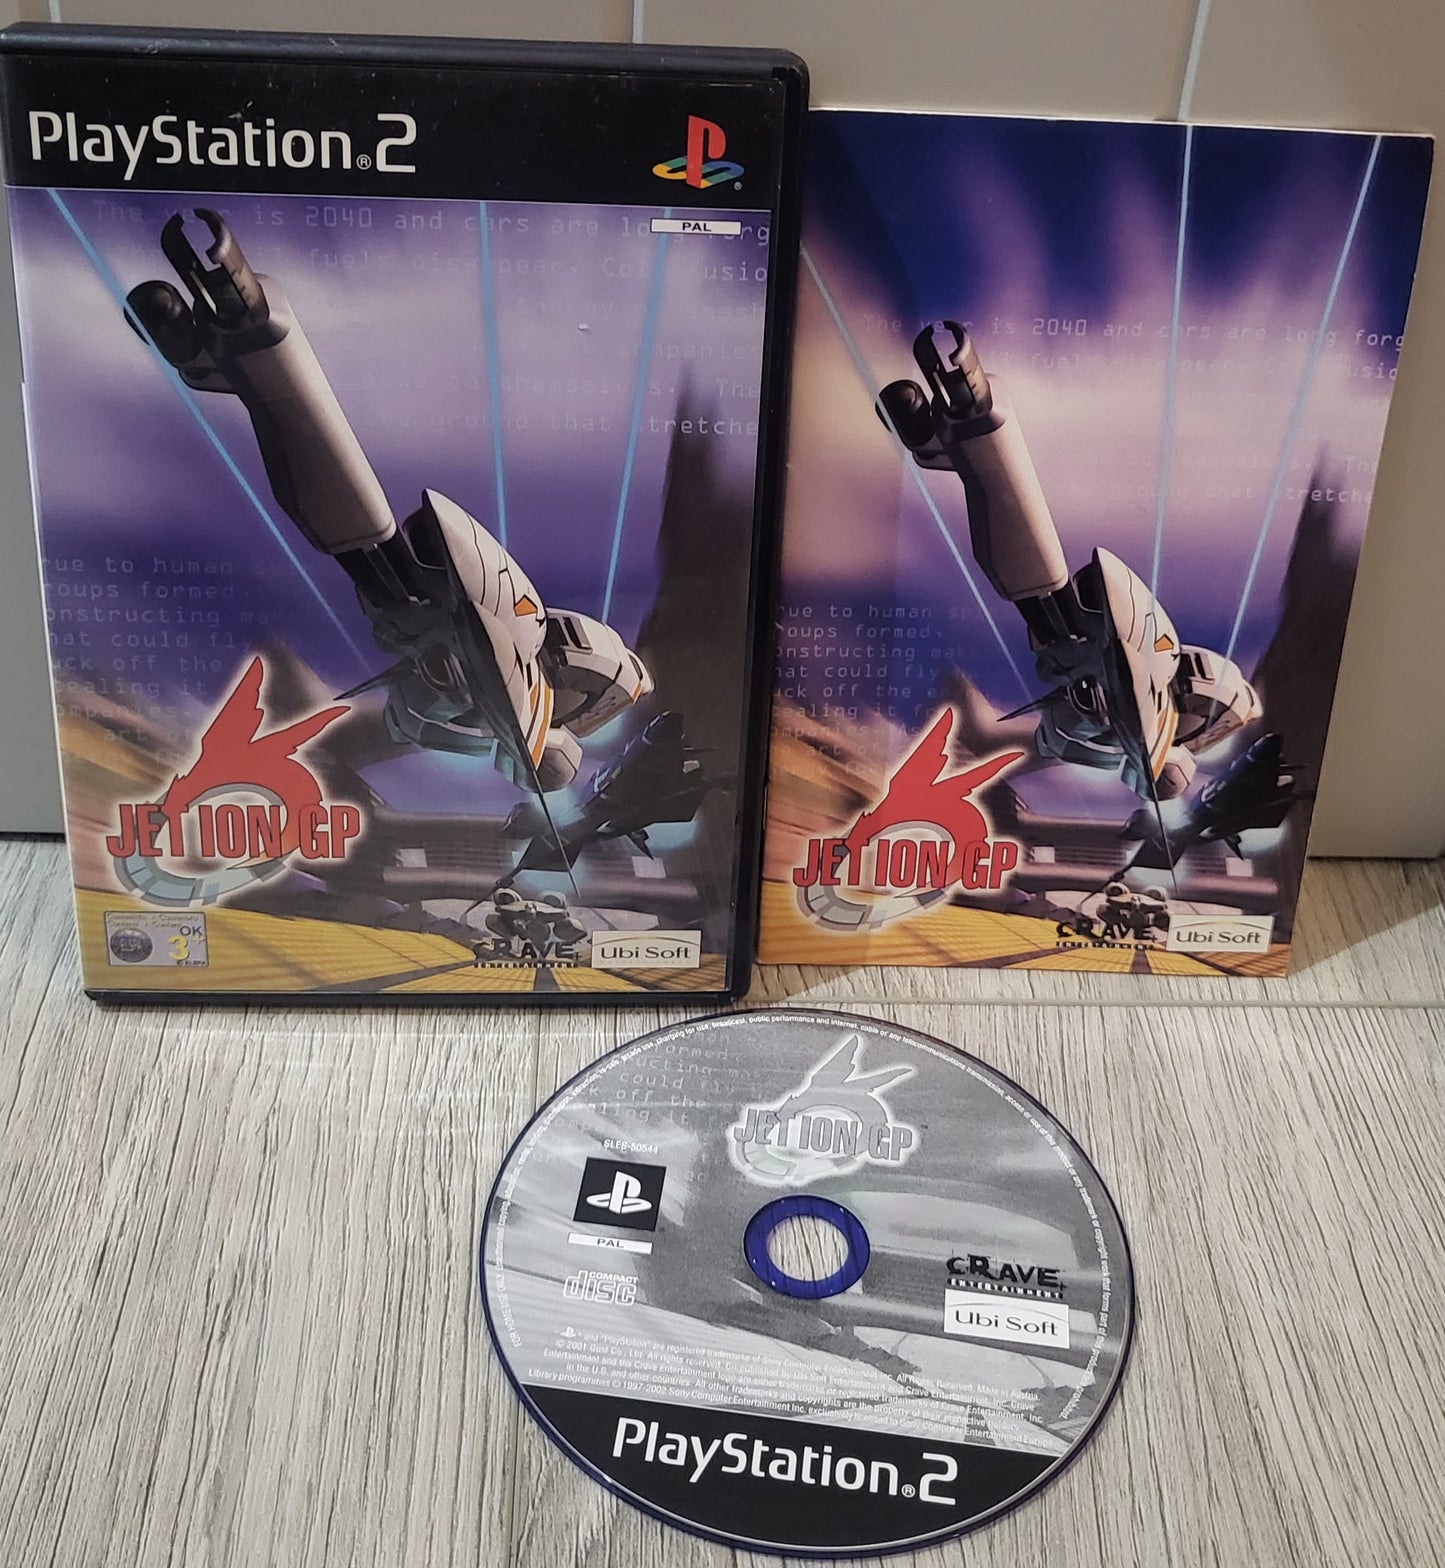 Jet Ion GP Sony Playstation 2 (PS2) Game